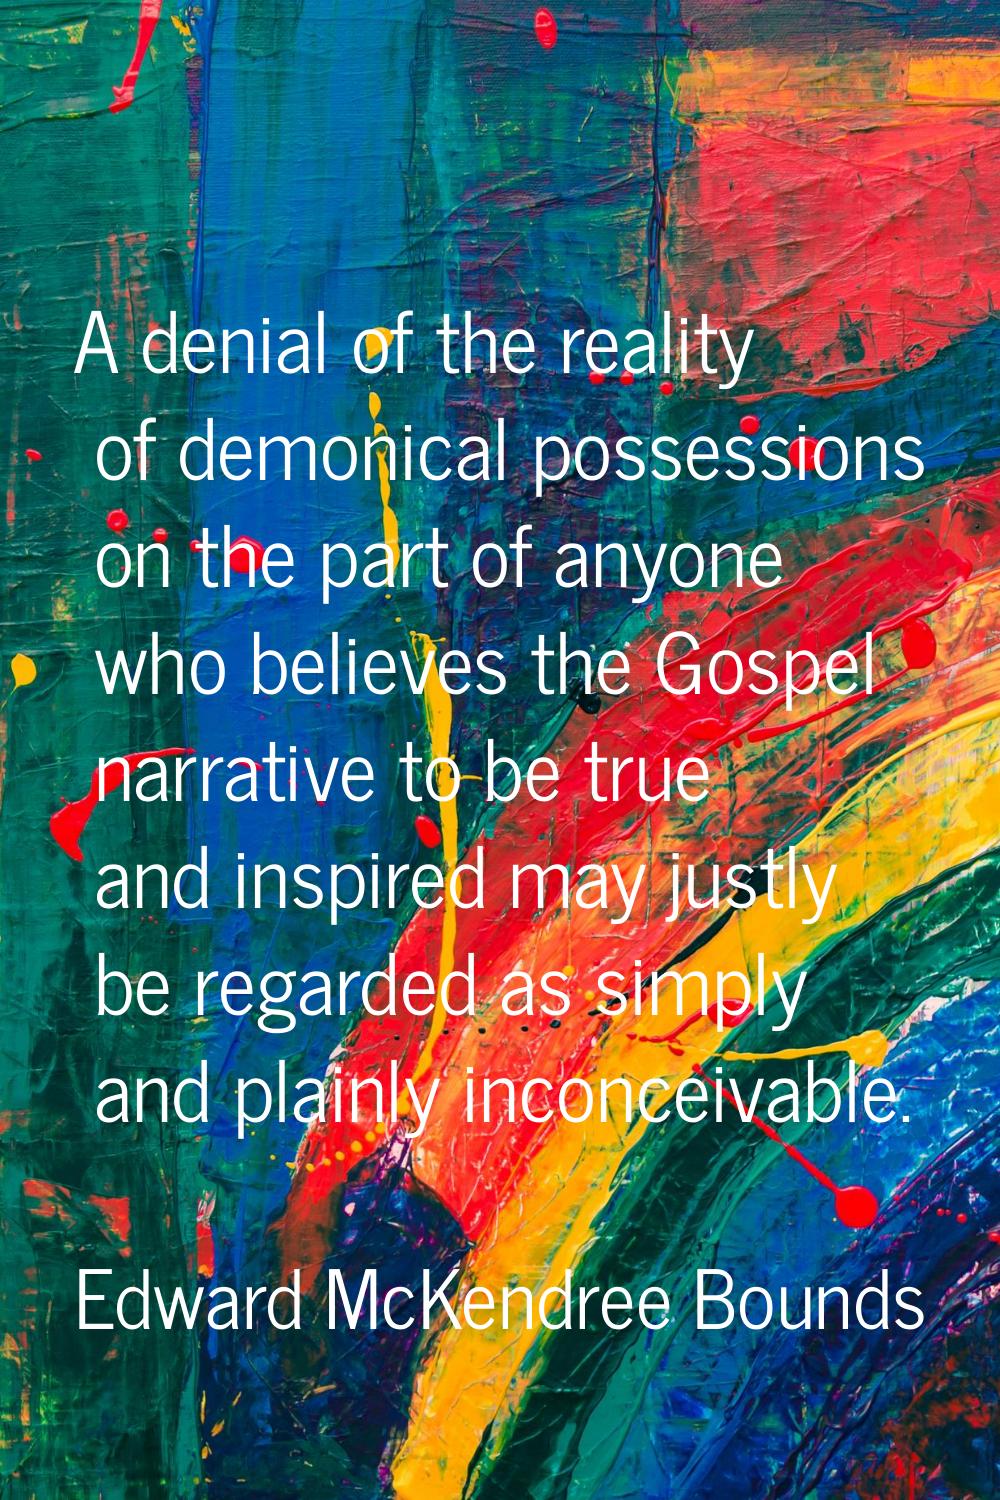 A denial of the reality of demonical possessions on the part of anyone who believes the Gospel narr